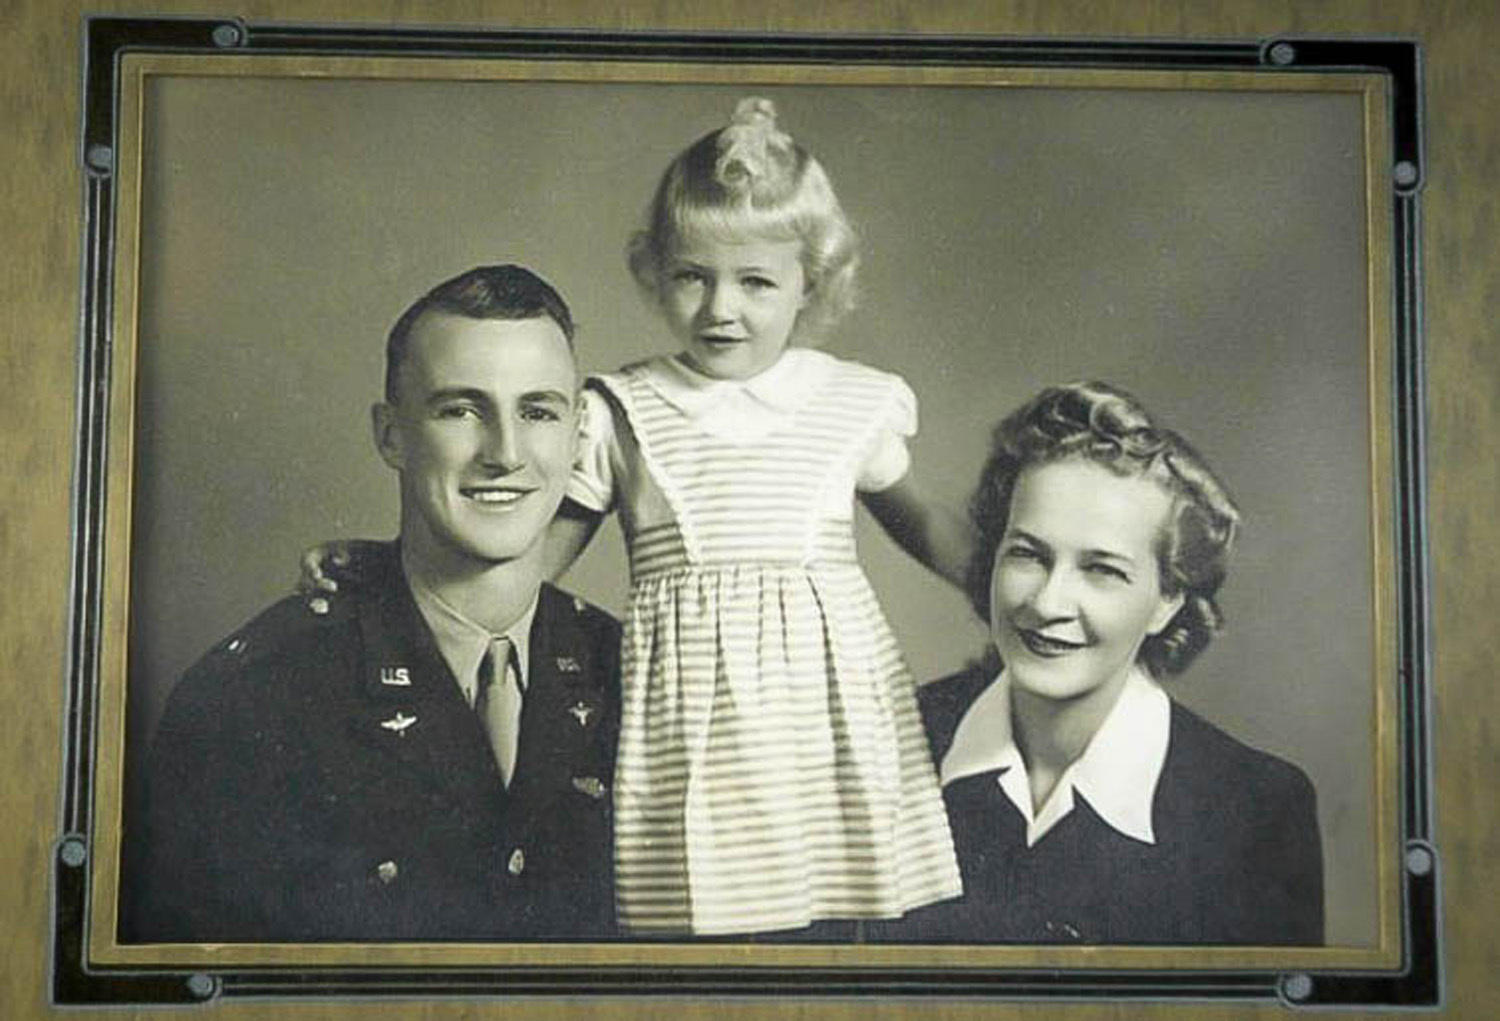 Captain Carl Ekstrom, his daughter Victoria, and wife Myrtle are shown in a family photo prior to his overseas involvement in World War II. Ekstrom was shot down over France while piloting a P-47 Thunderbolt following a bomber escort mission. (Courtesy photo)